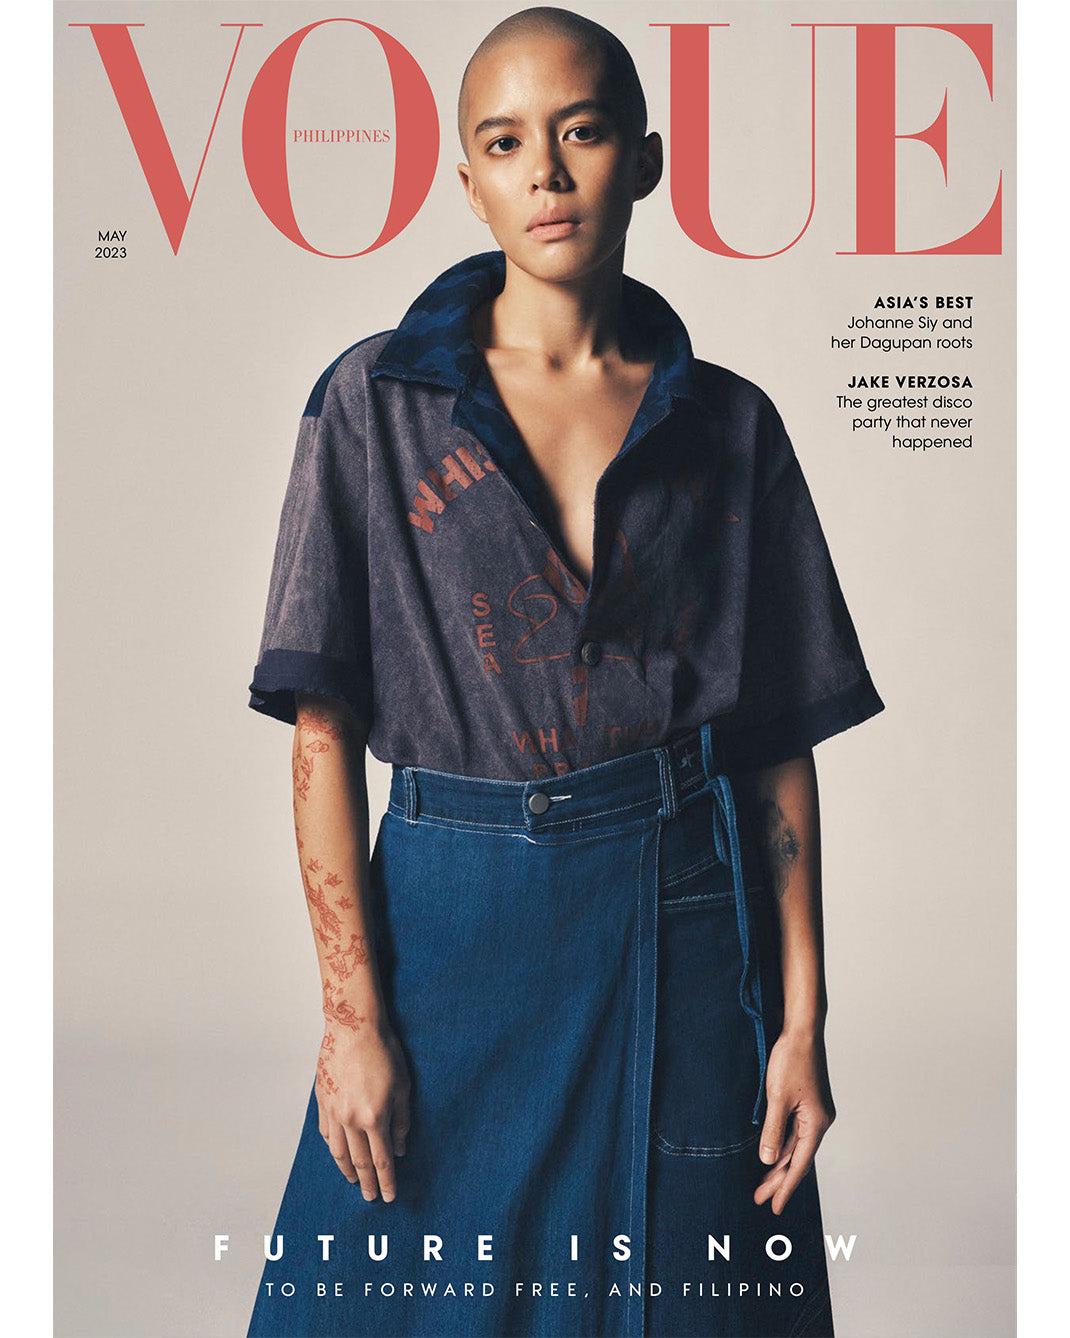 Vogue Philippines: May 2023 Cover 2